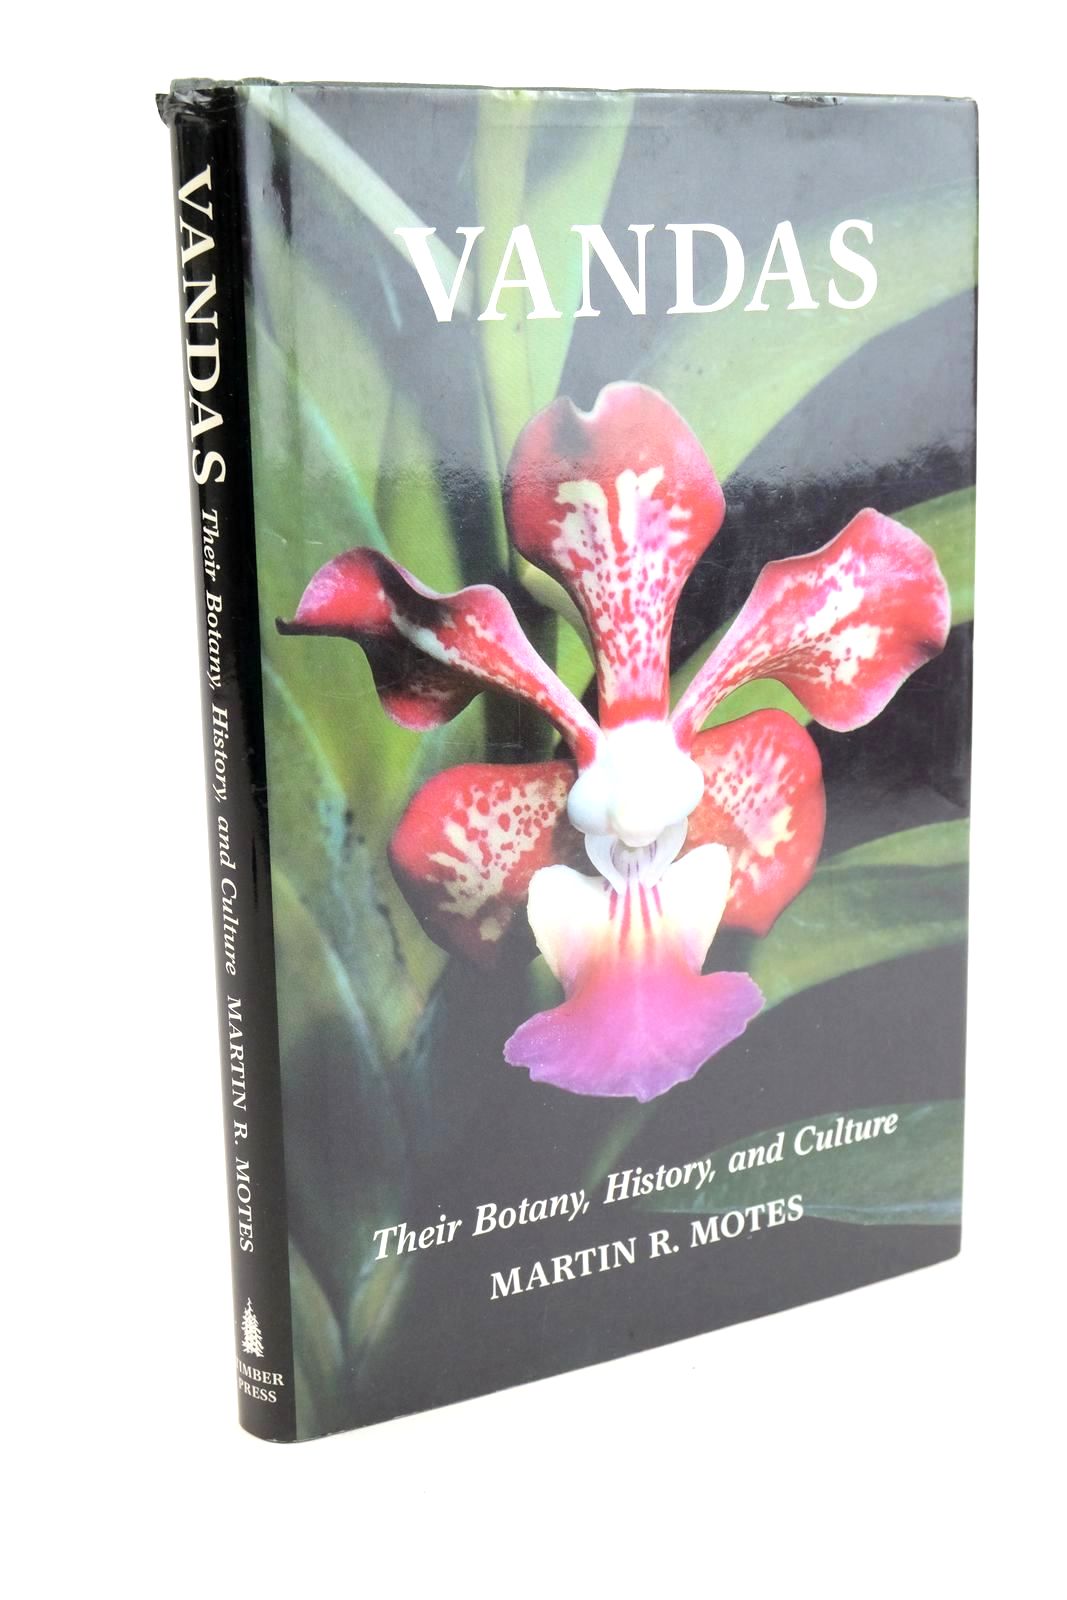 Photo of VANDAS THEIR BOTANY, HISTORY, AND CULTURE- Stock Number: 1324016